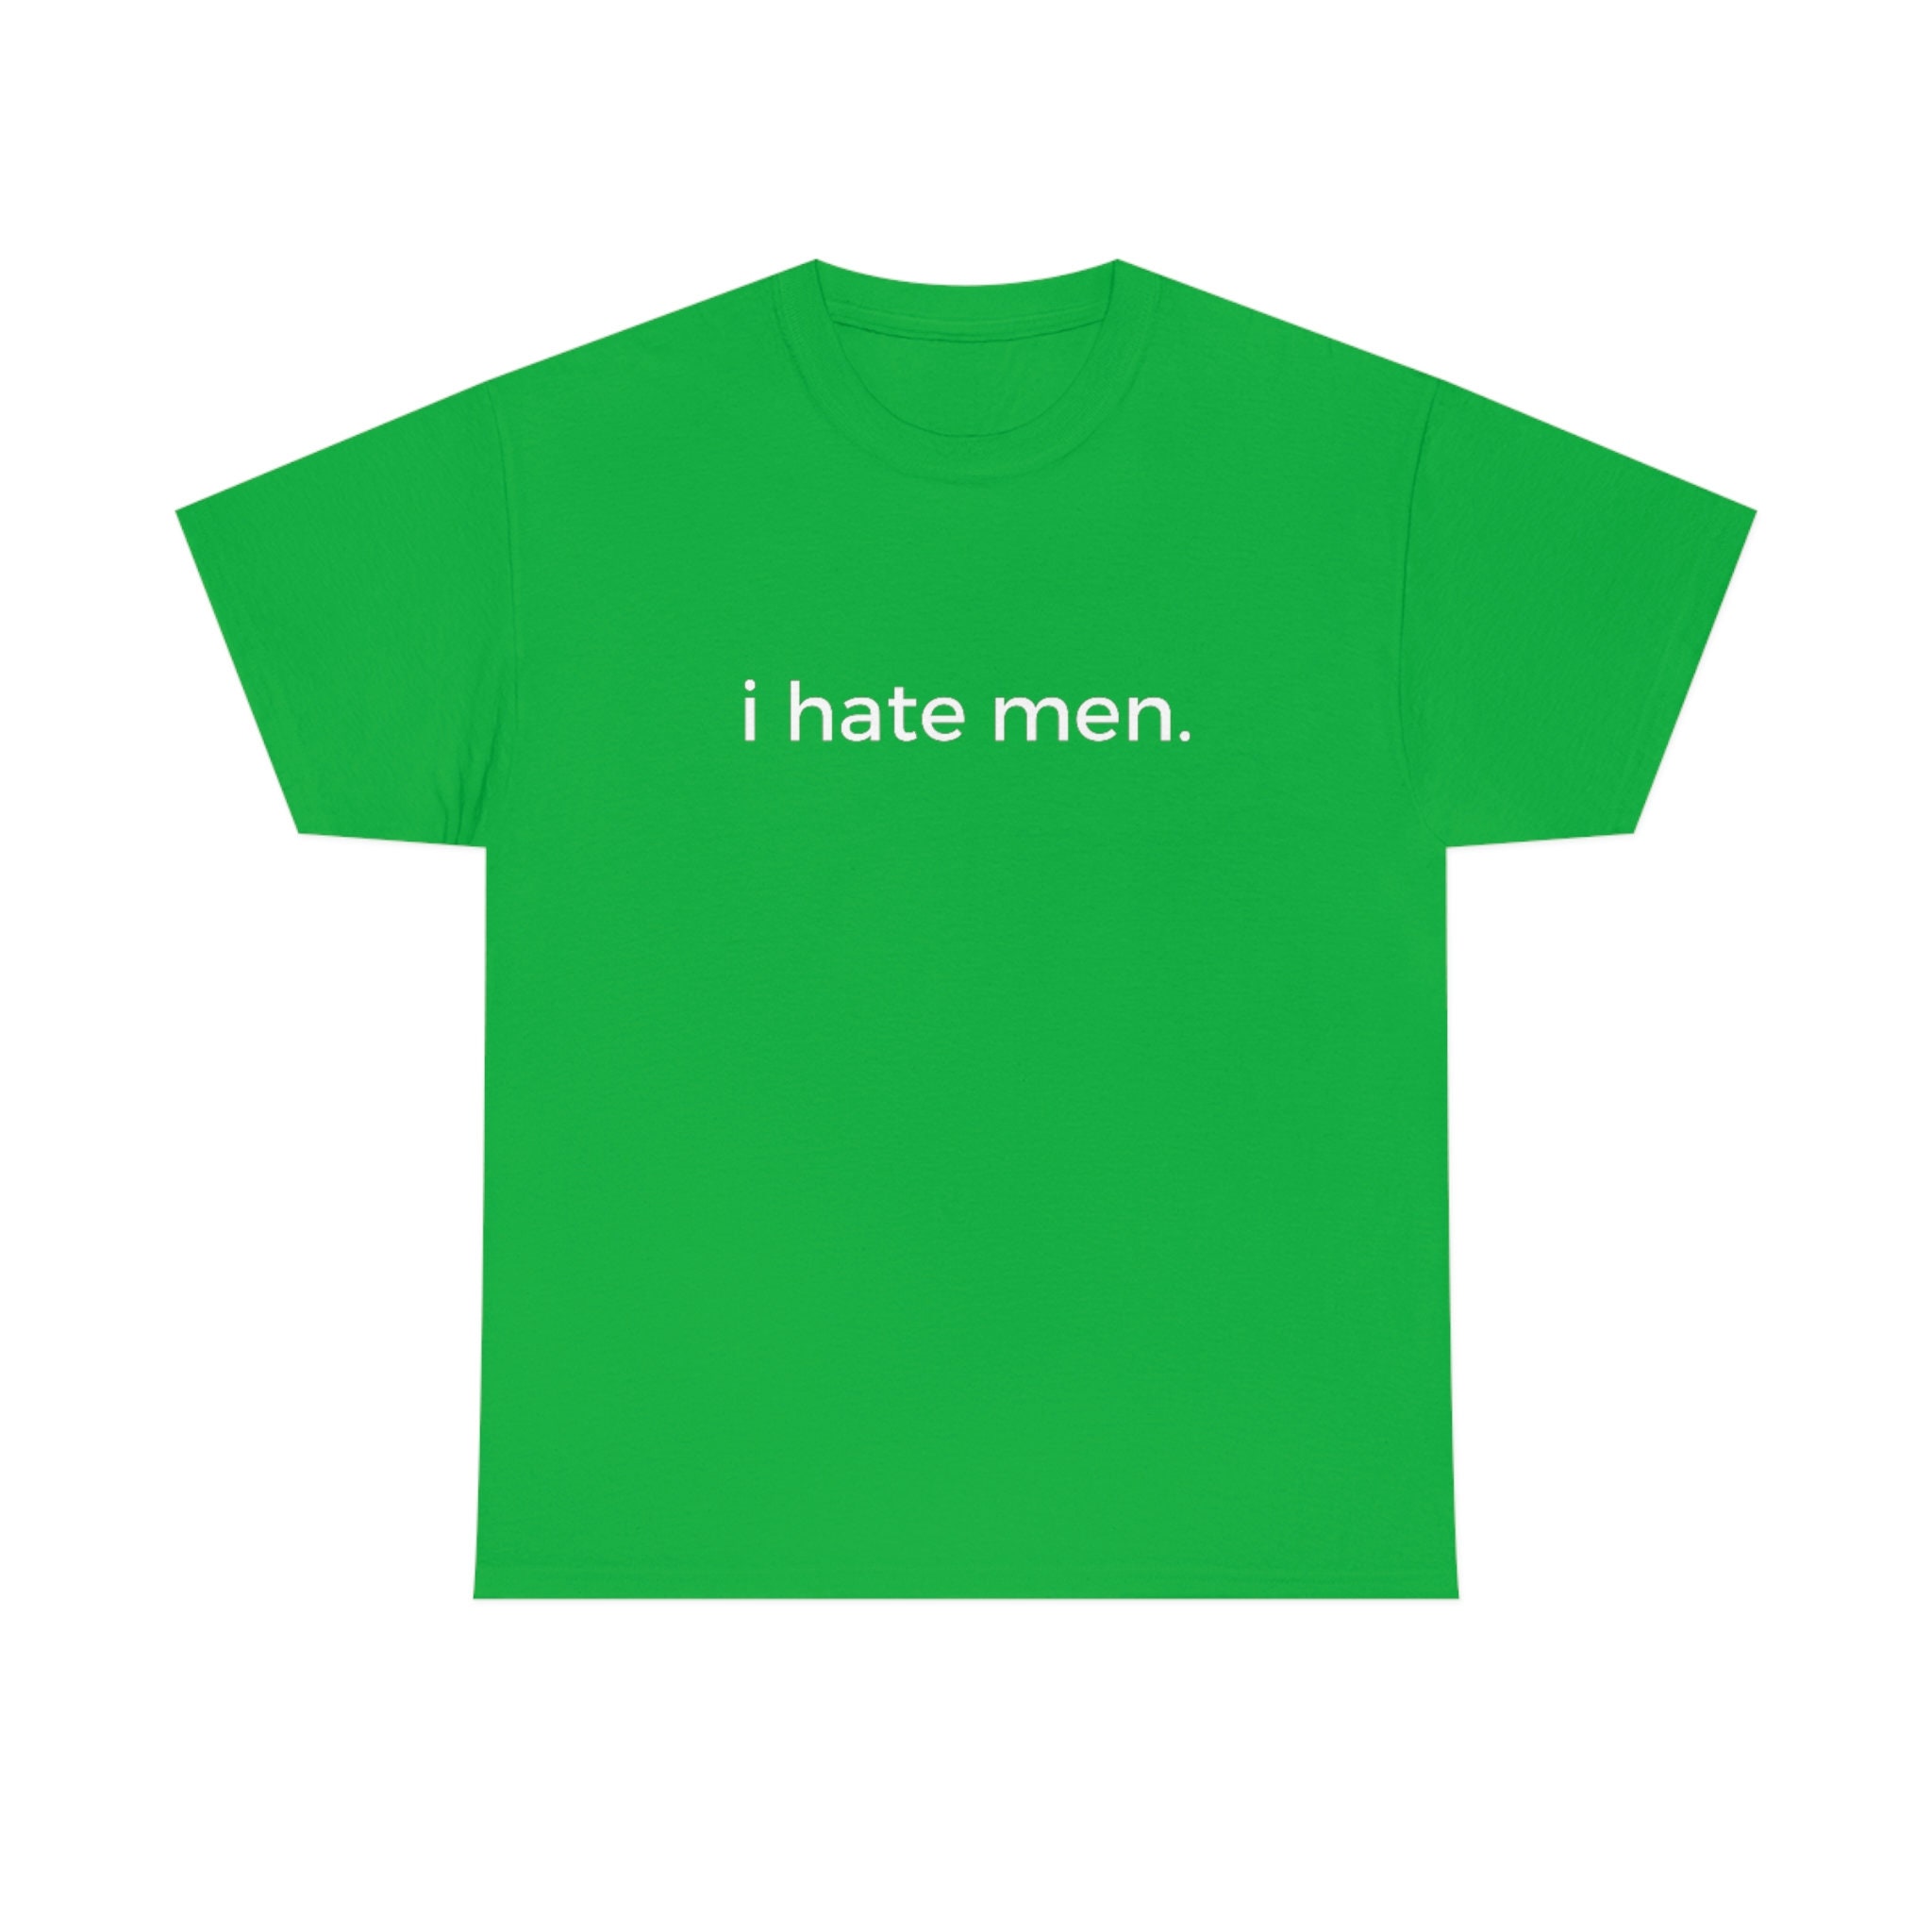 I hate t-shirts that say Essential T-Shirt for Sale by Follow-me